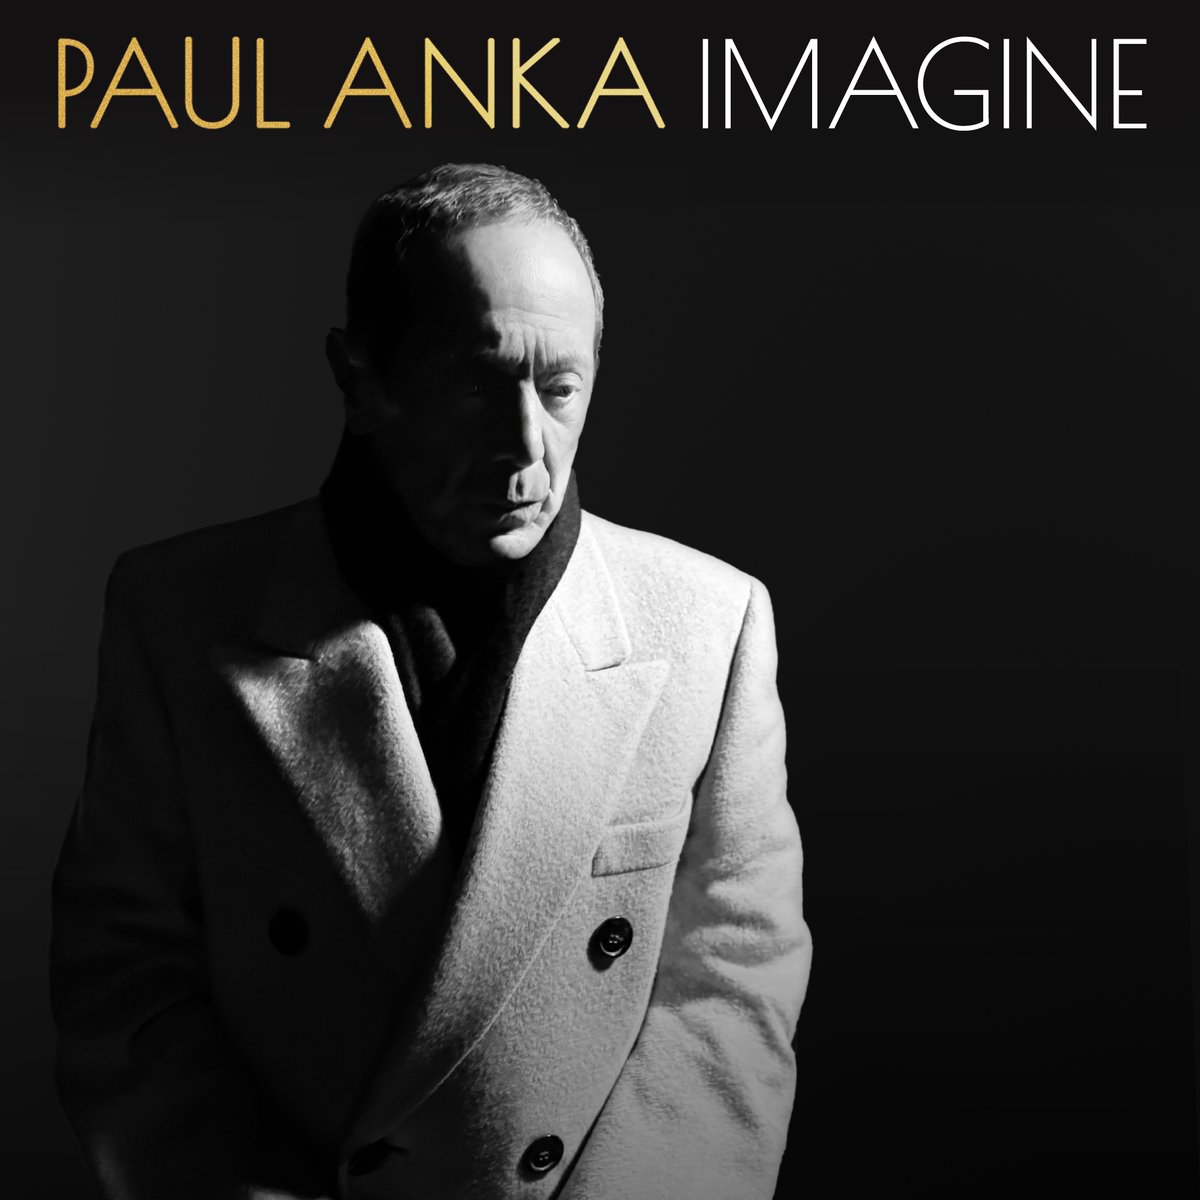 Let's embark on a journey of imagination with my new single 'Imagine'. May it inspire and motivate you, setting the perfect tone for your day! Listen now (lnk.to/PAImagine)